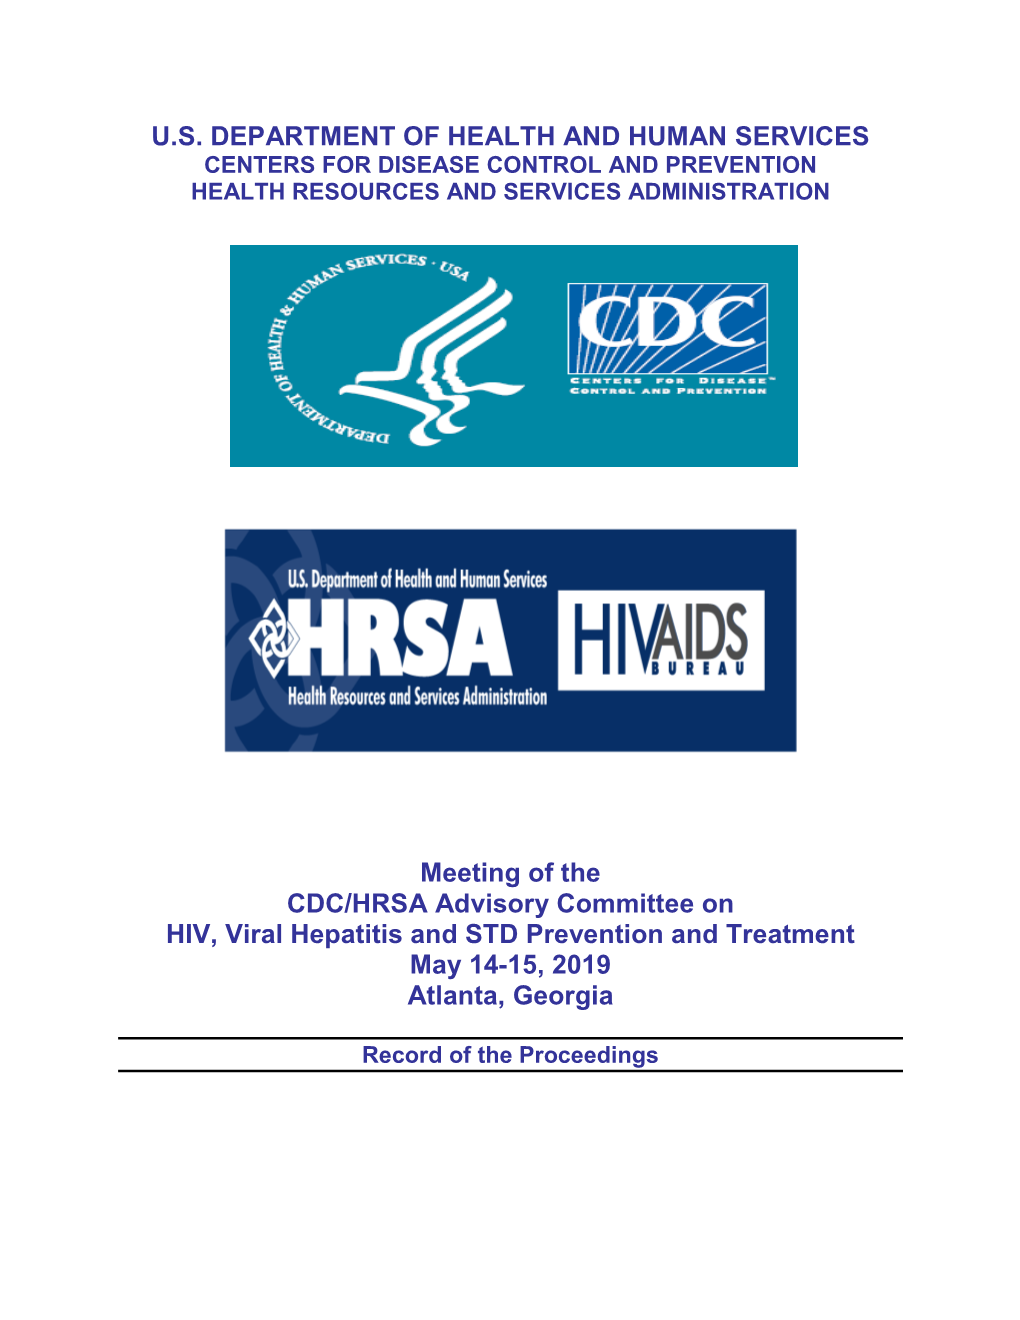 Meeting of the CDC/HRSA Advisory Committee on HIV, Viral Hepatitis and STD Prevention and Treatment May 14-15, 2019 Atlanta, Georgia